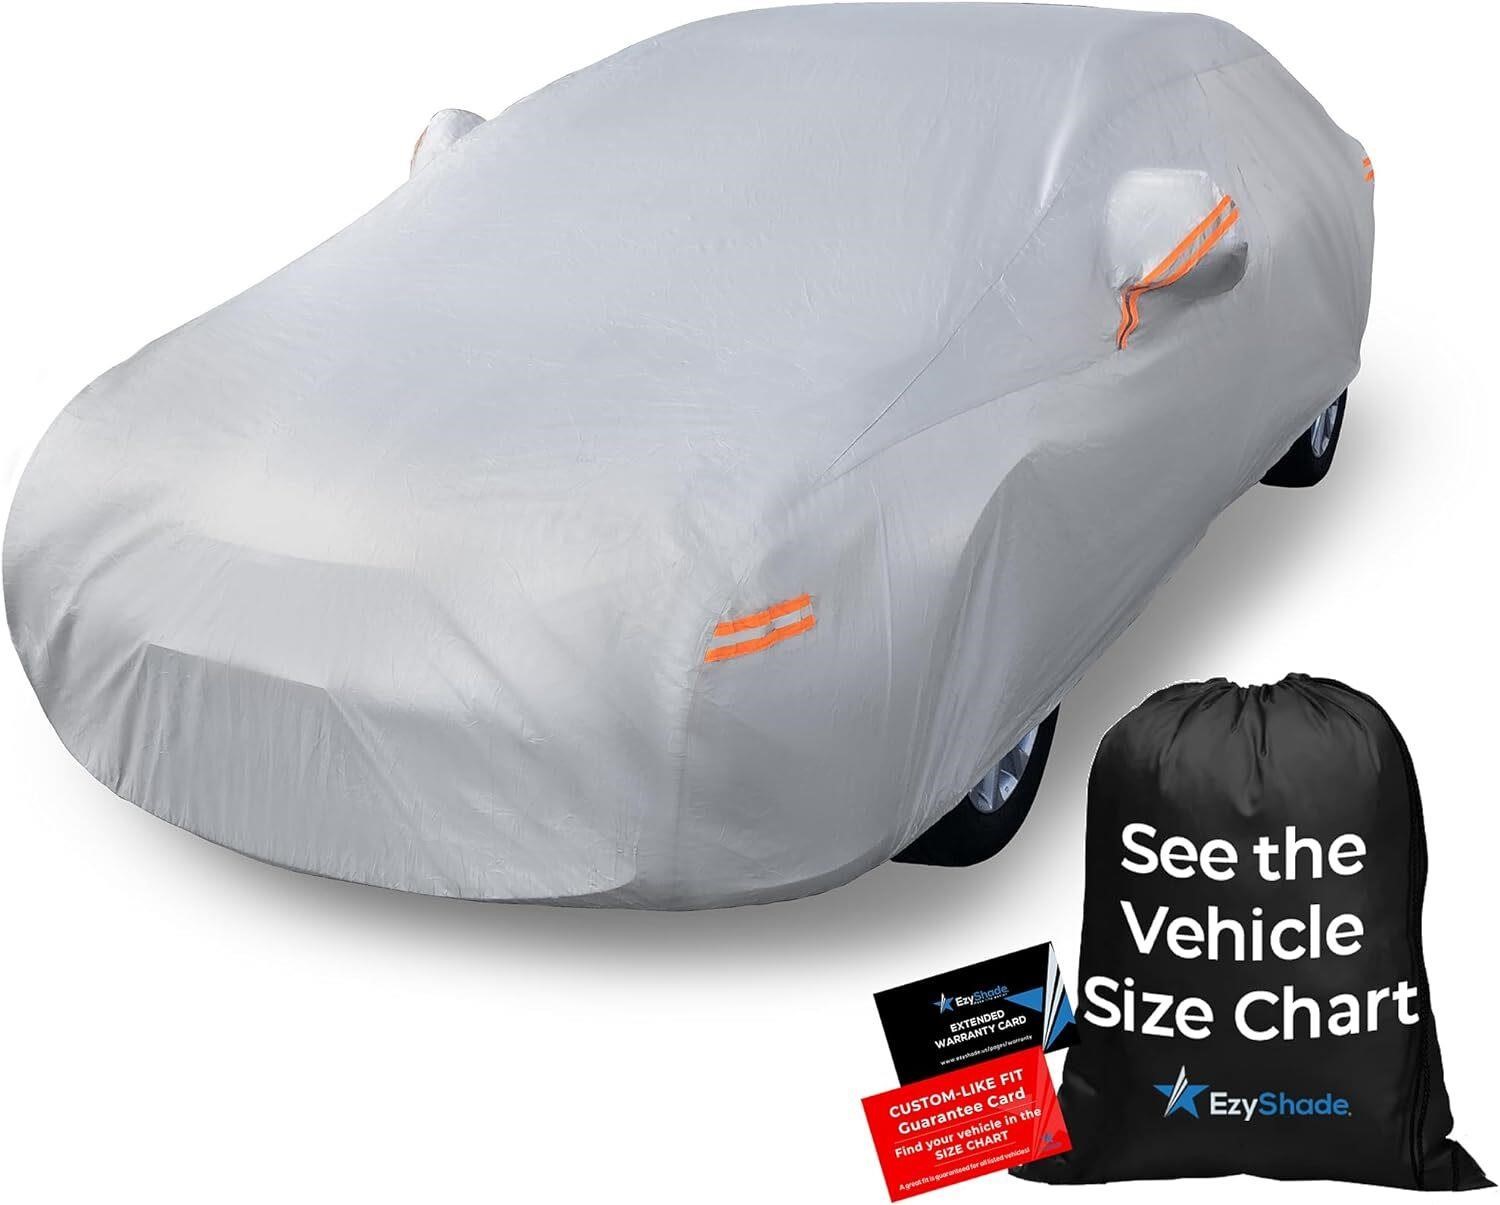 EzyShade Car Cover A4. Waterproof All Weather.